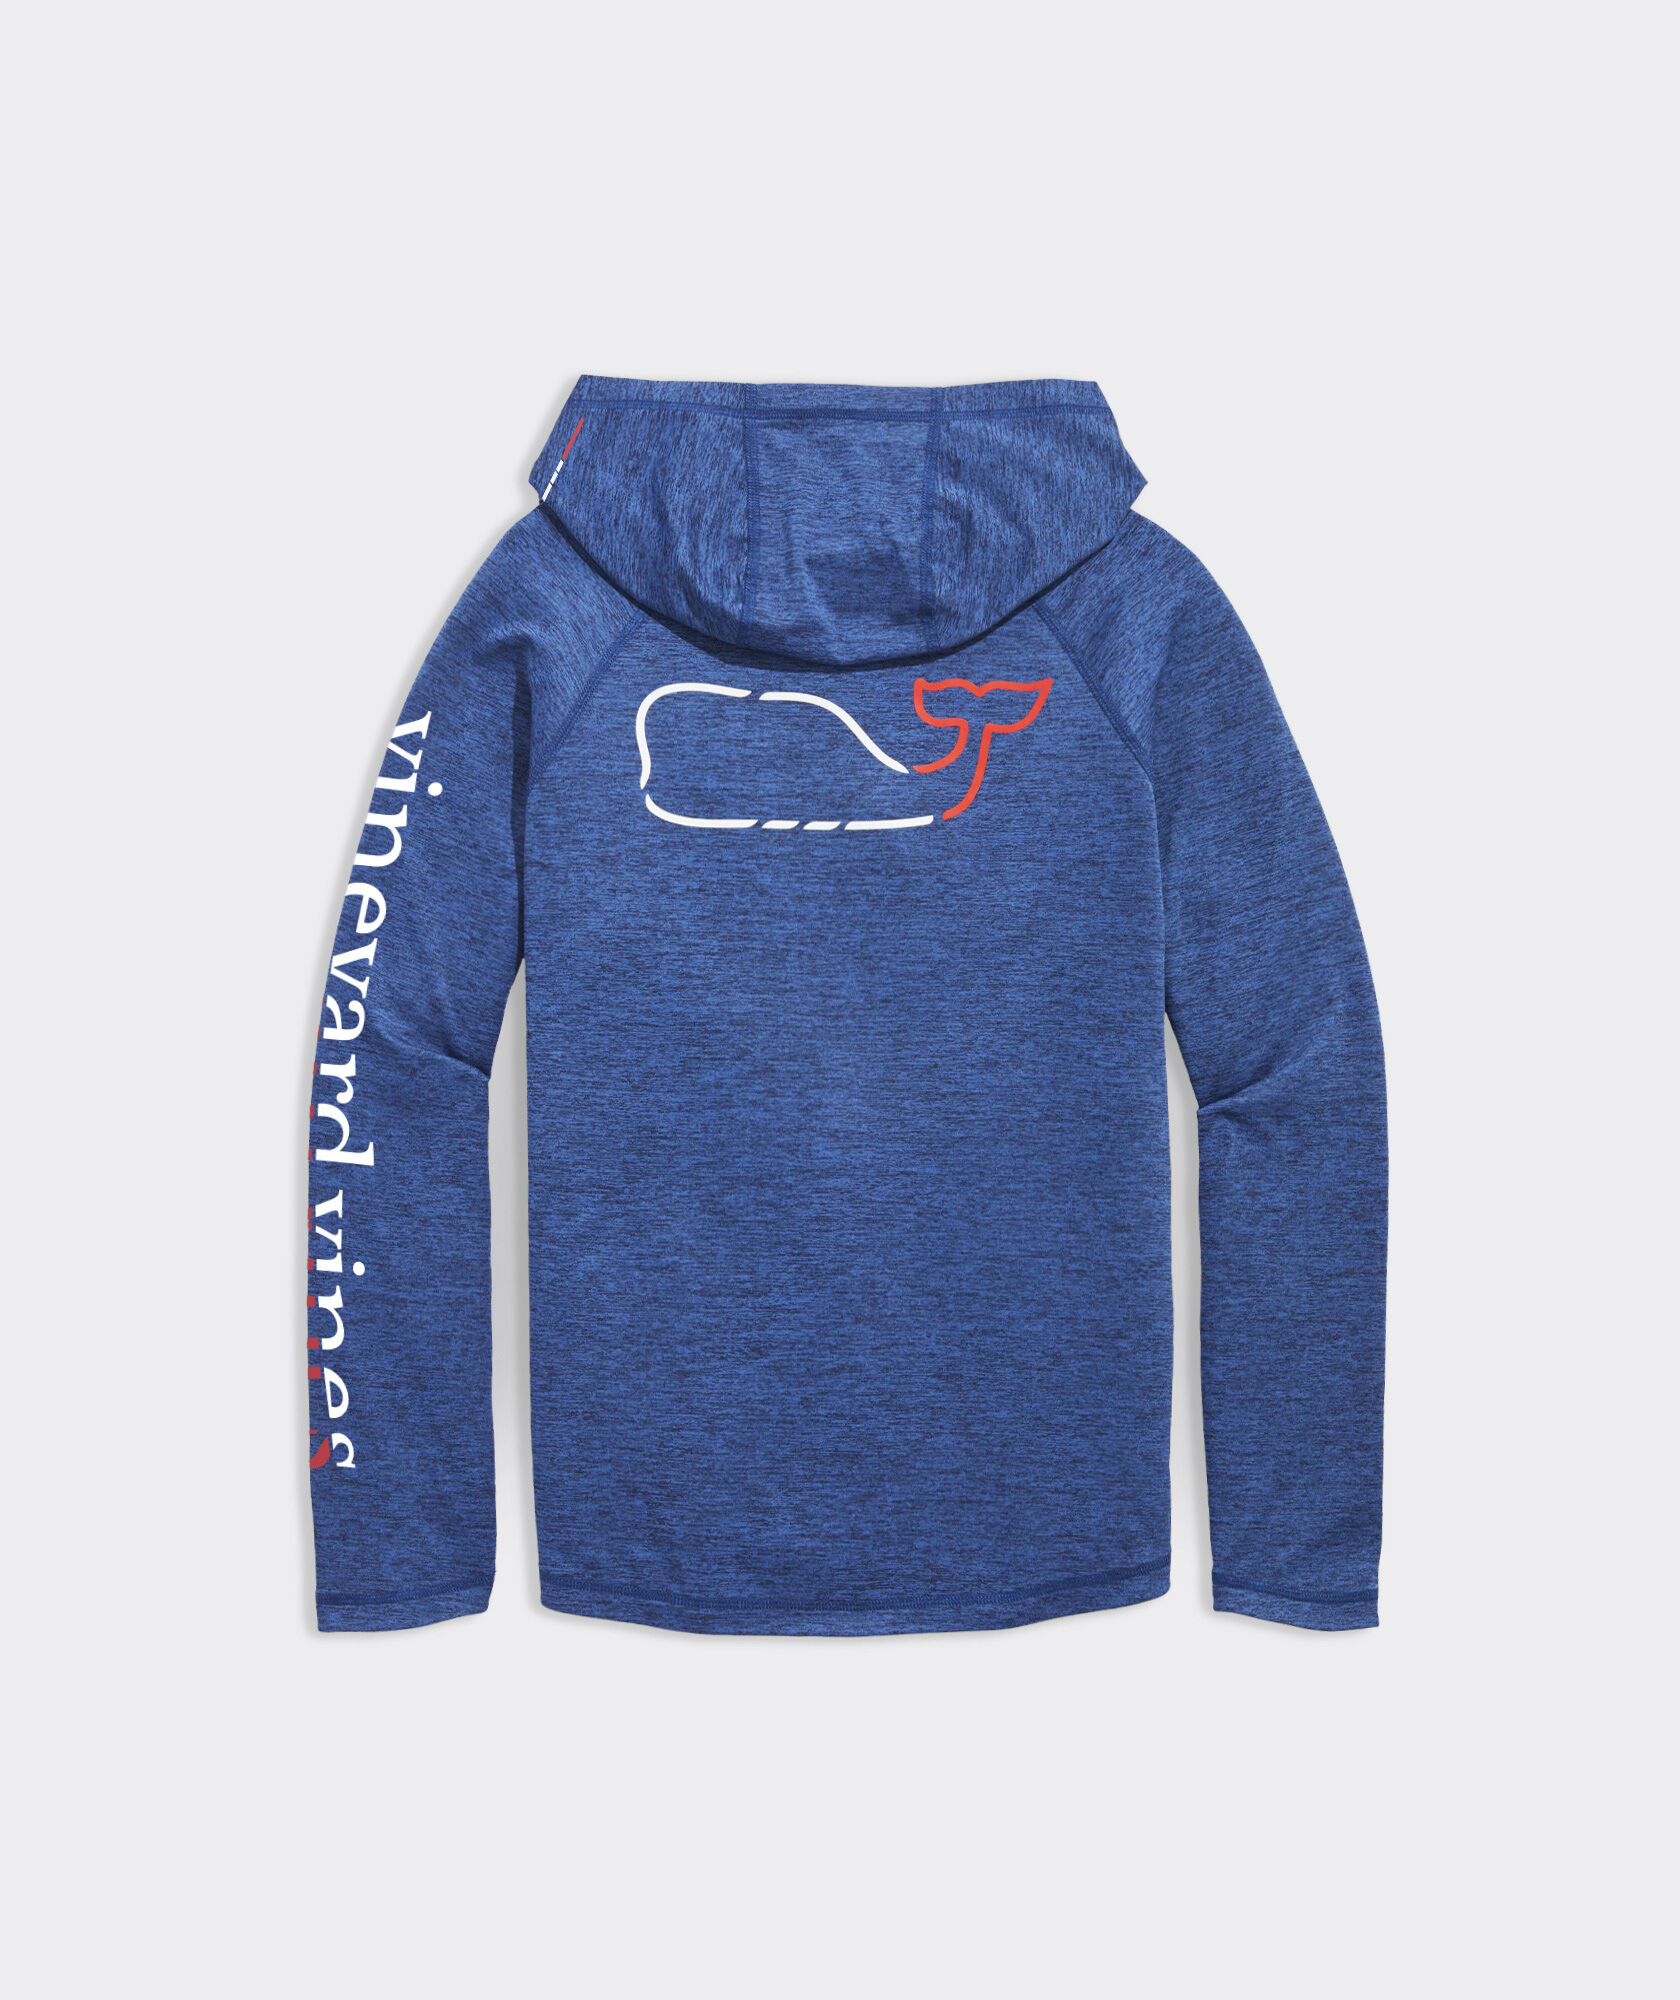 On-The-Go Whale Outline Long-Sleeve Harbor Performance Hoodie Tee